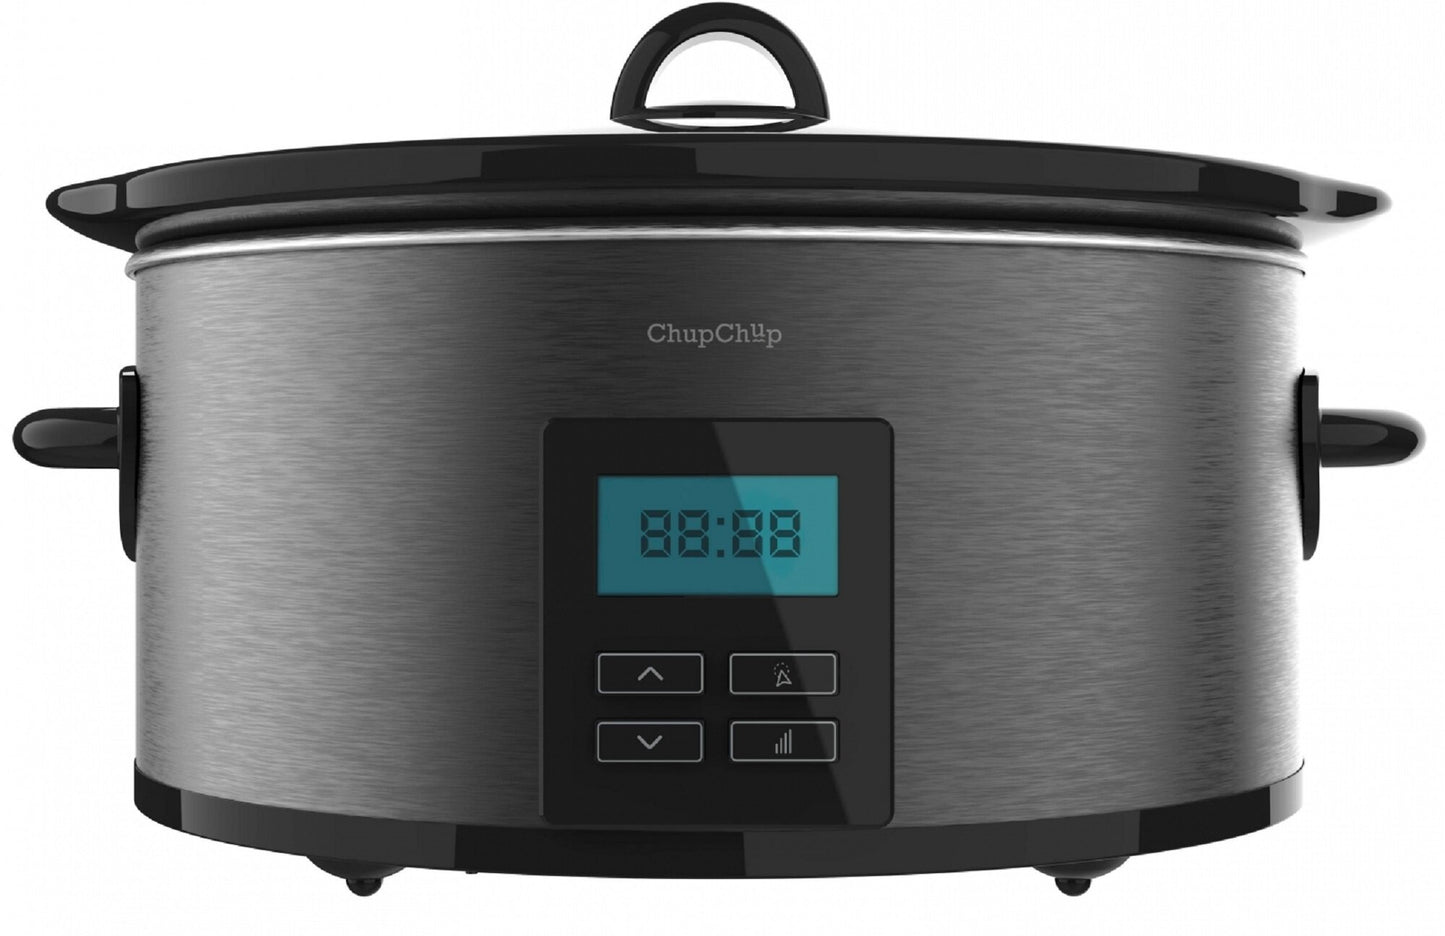 Cecotec Chup Chup Slow Cooker 5.5Ltr (CE2031)